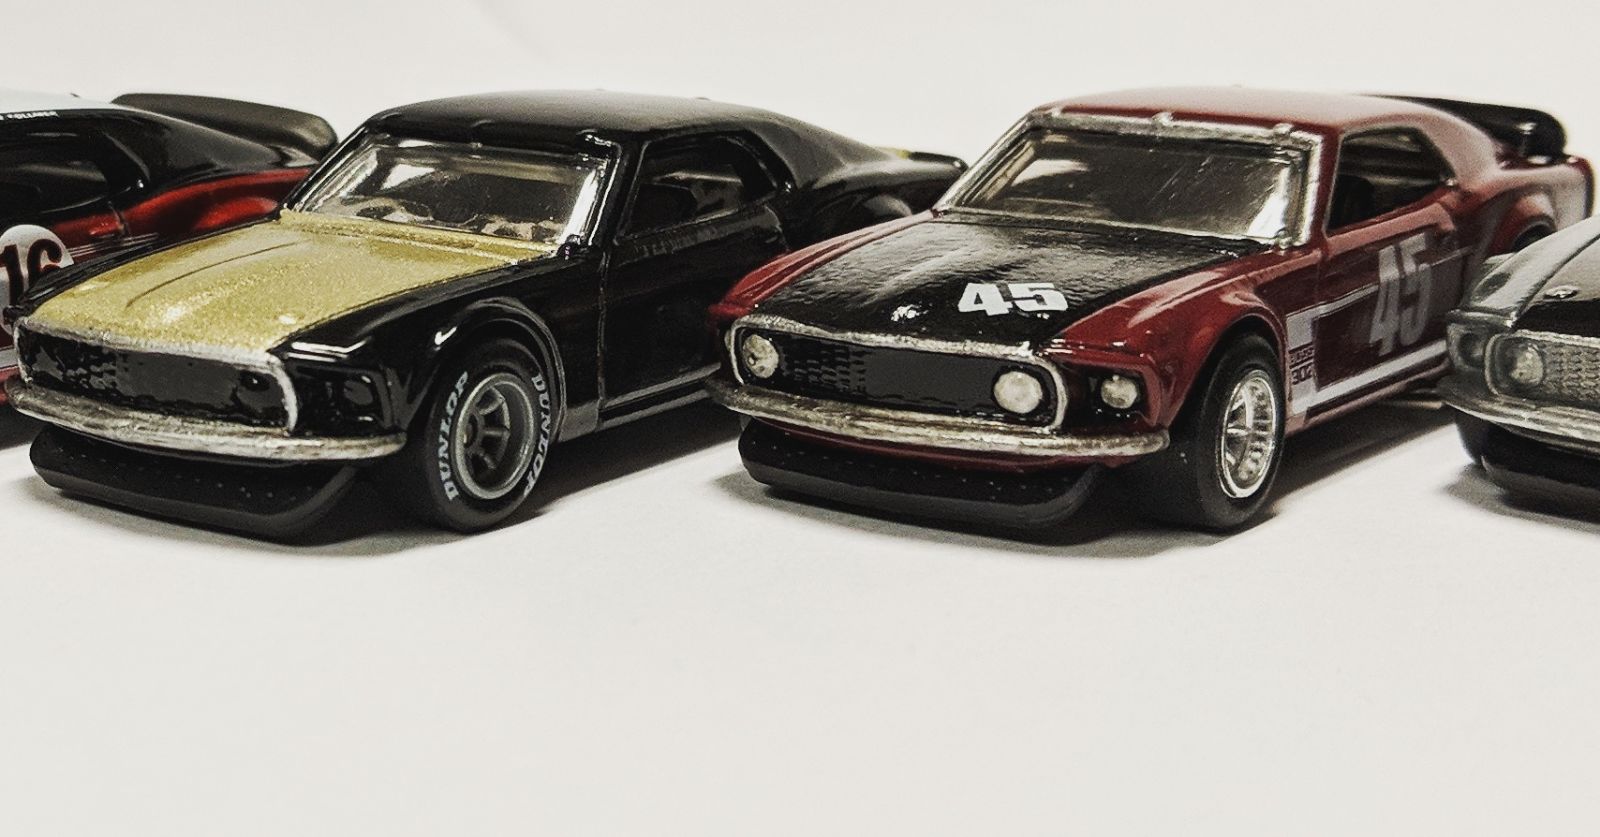 #45 Reventlow/Pettey Racing Trans Am race car and #11 Smokey Yunick Trans Am race car by our own Philiphilip @ VDH Customs